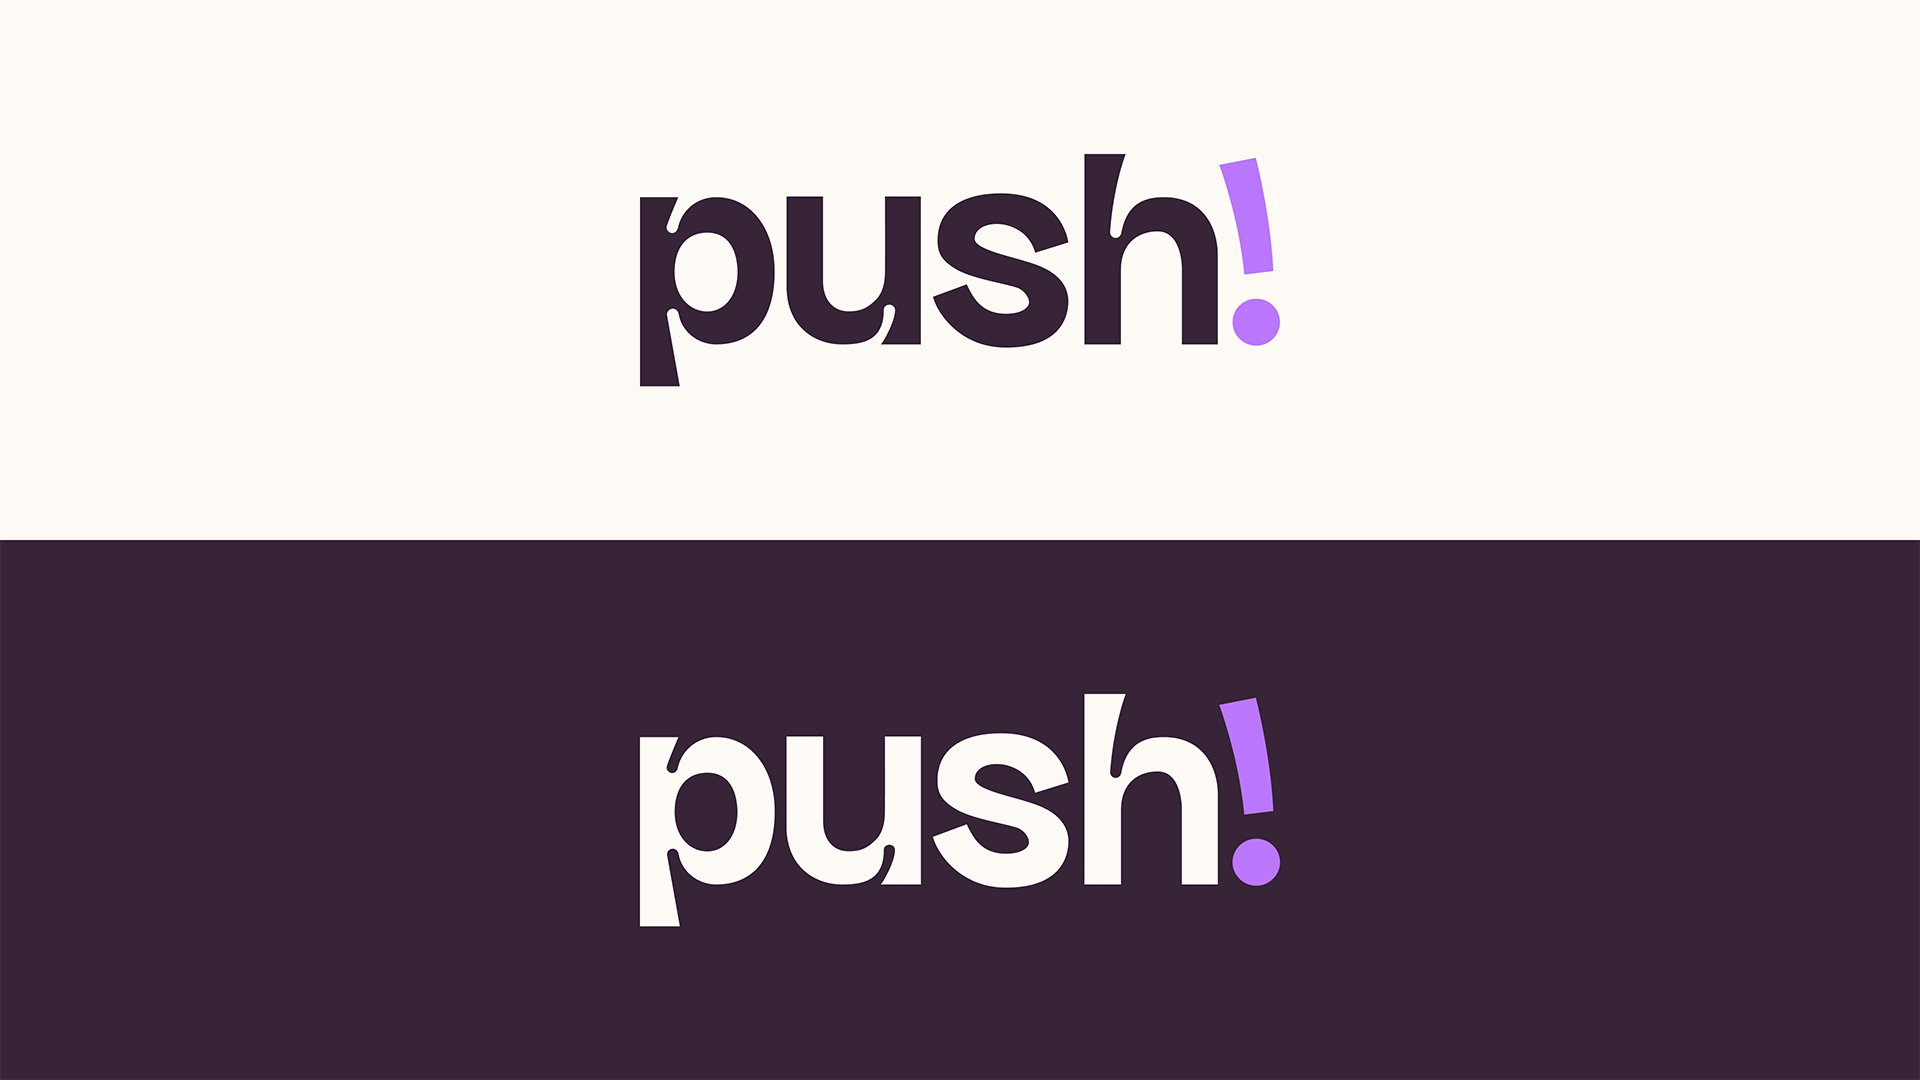 Two versions of the Push! logo